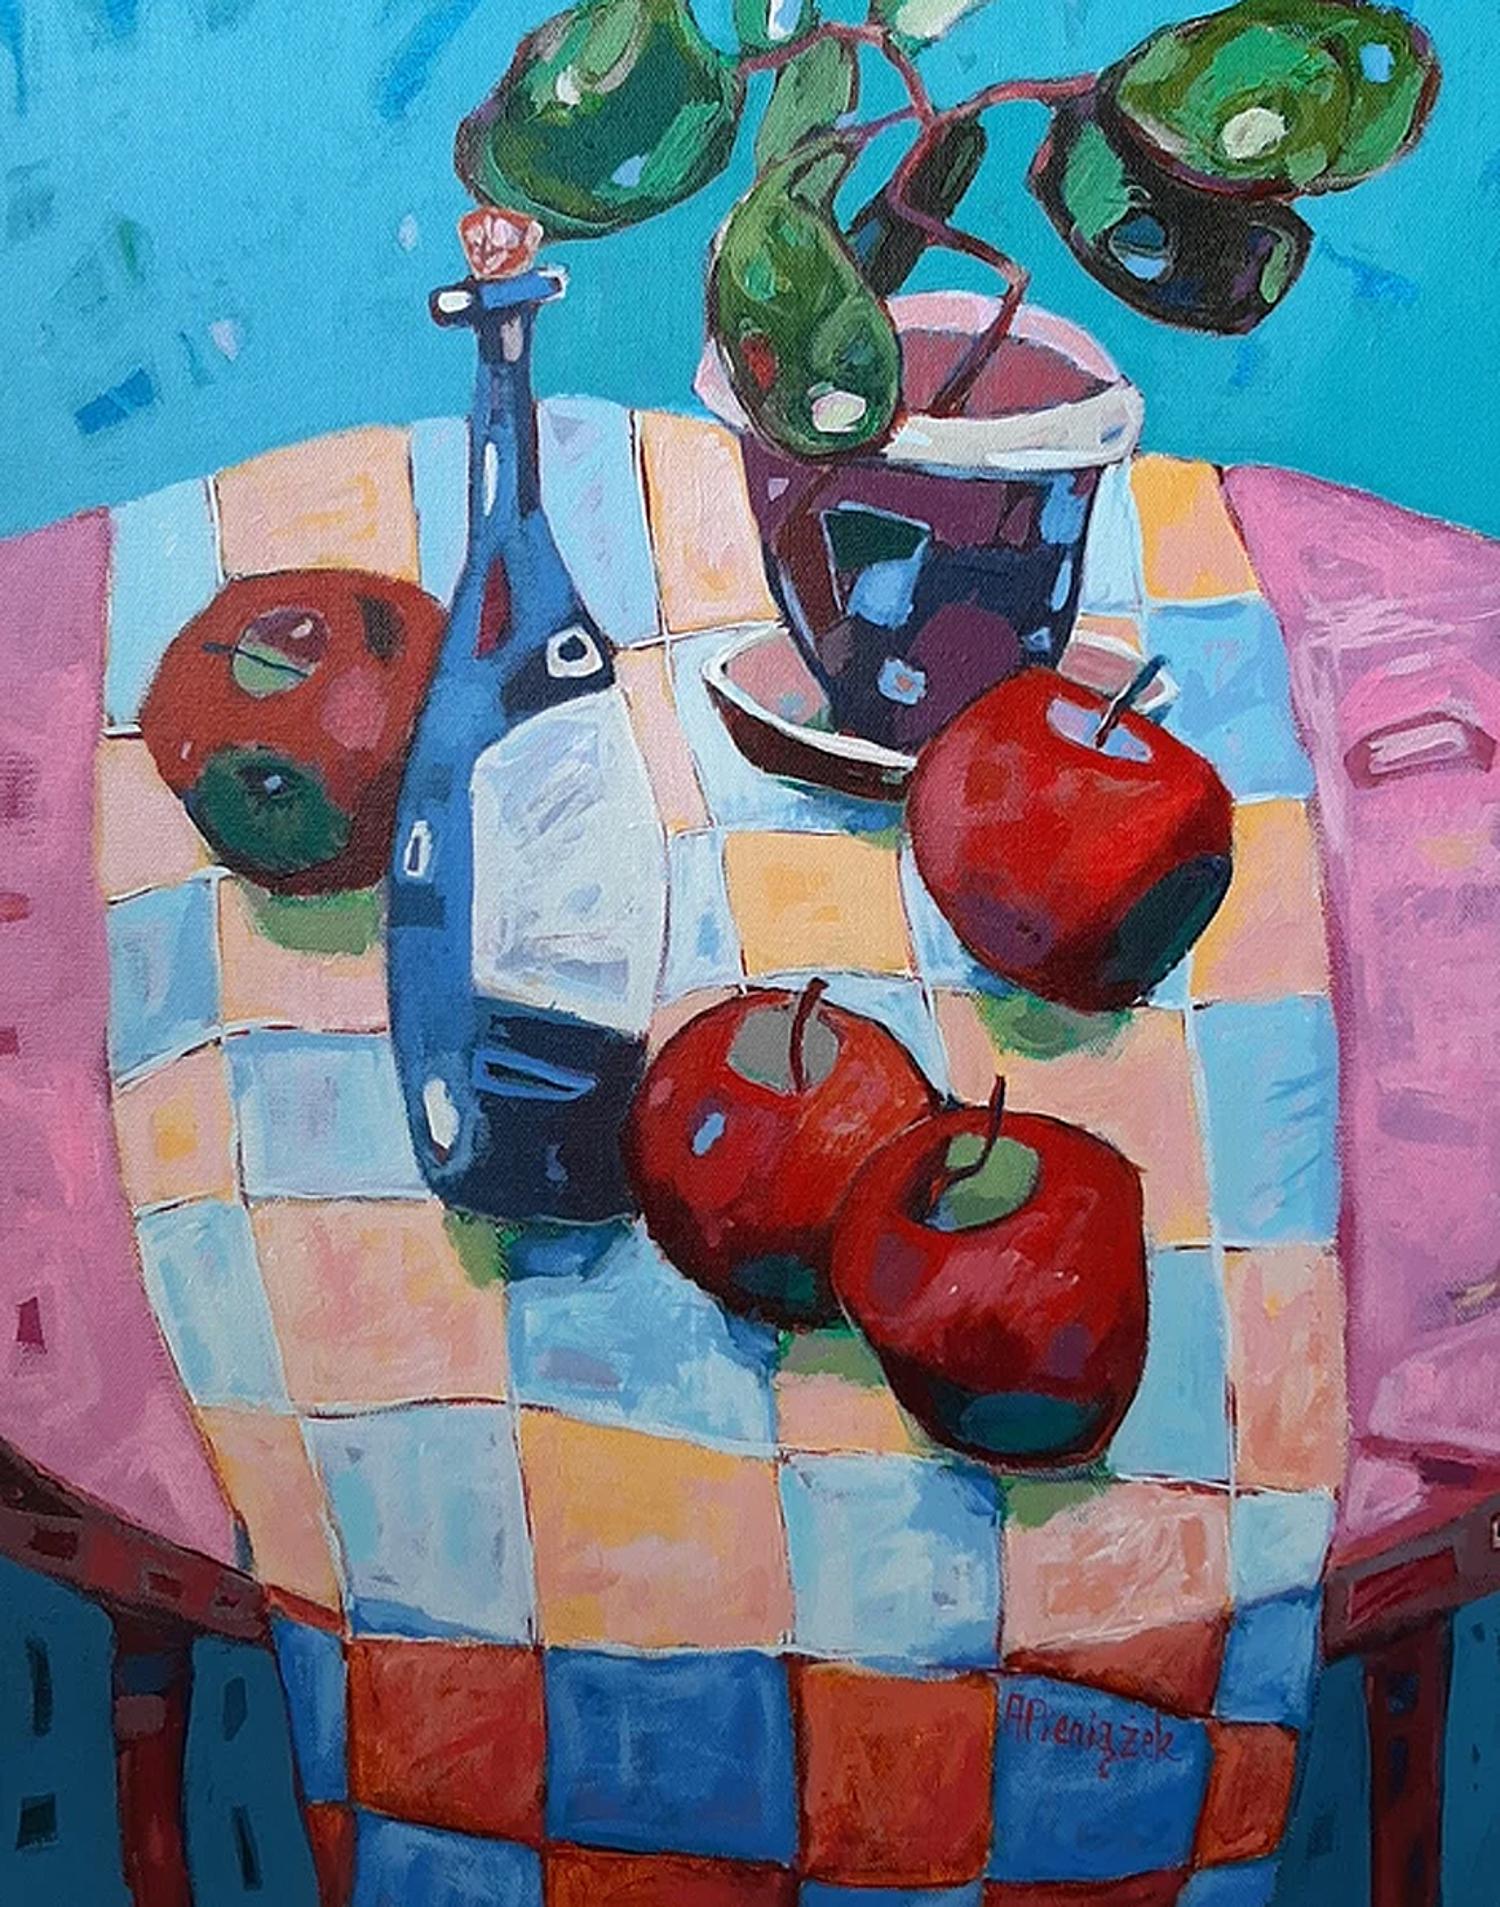 Ania Pieniazek Interior Painting - Wine & Red Apples - Colourful, Patterned Still Life: Acrylic on Canvas